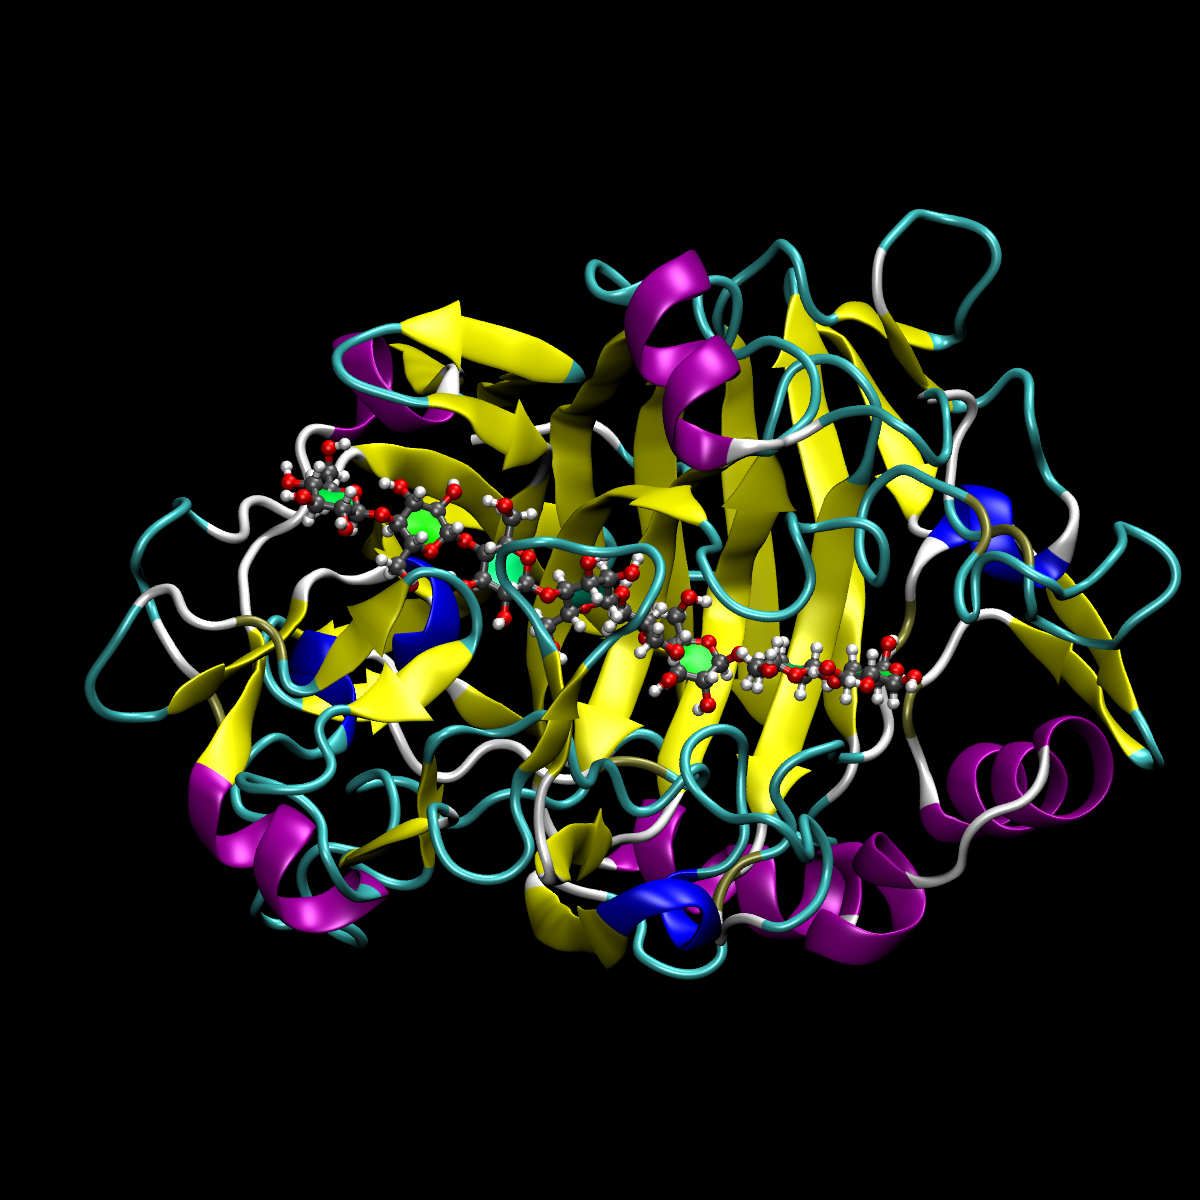 Snapshot of 7CEL pdb with octaose ligand. 